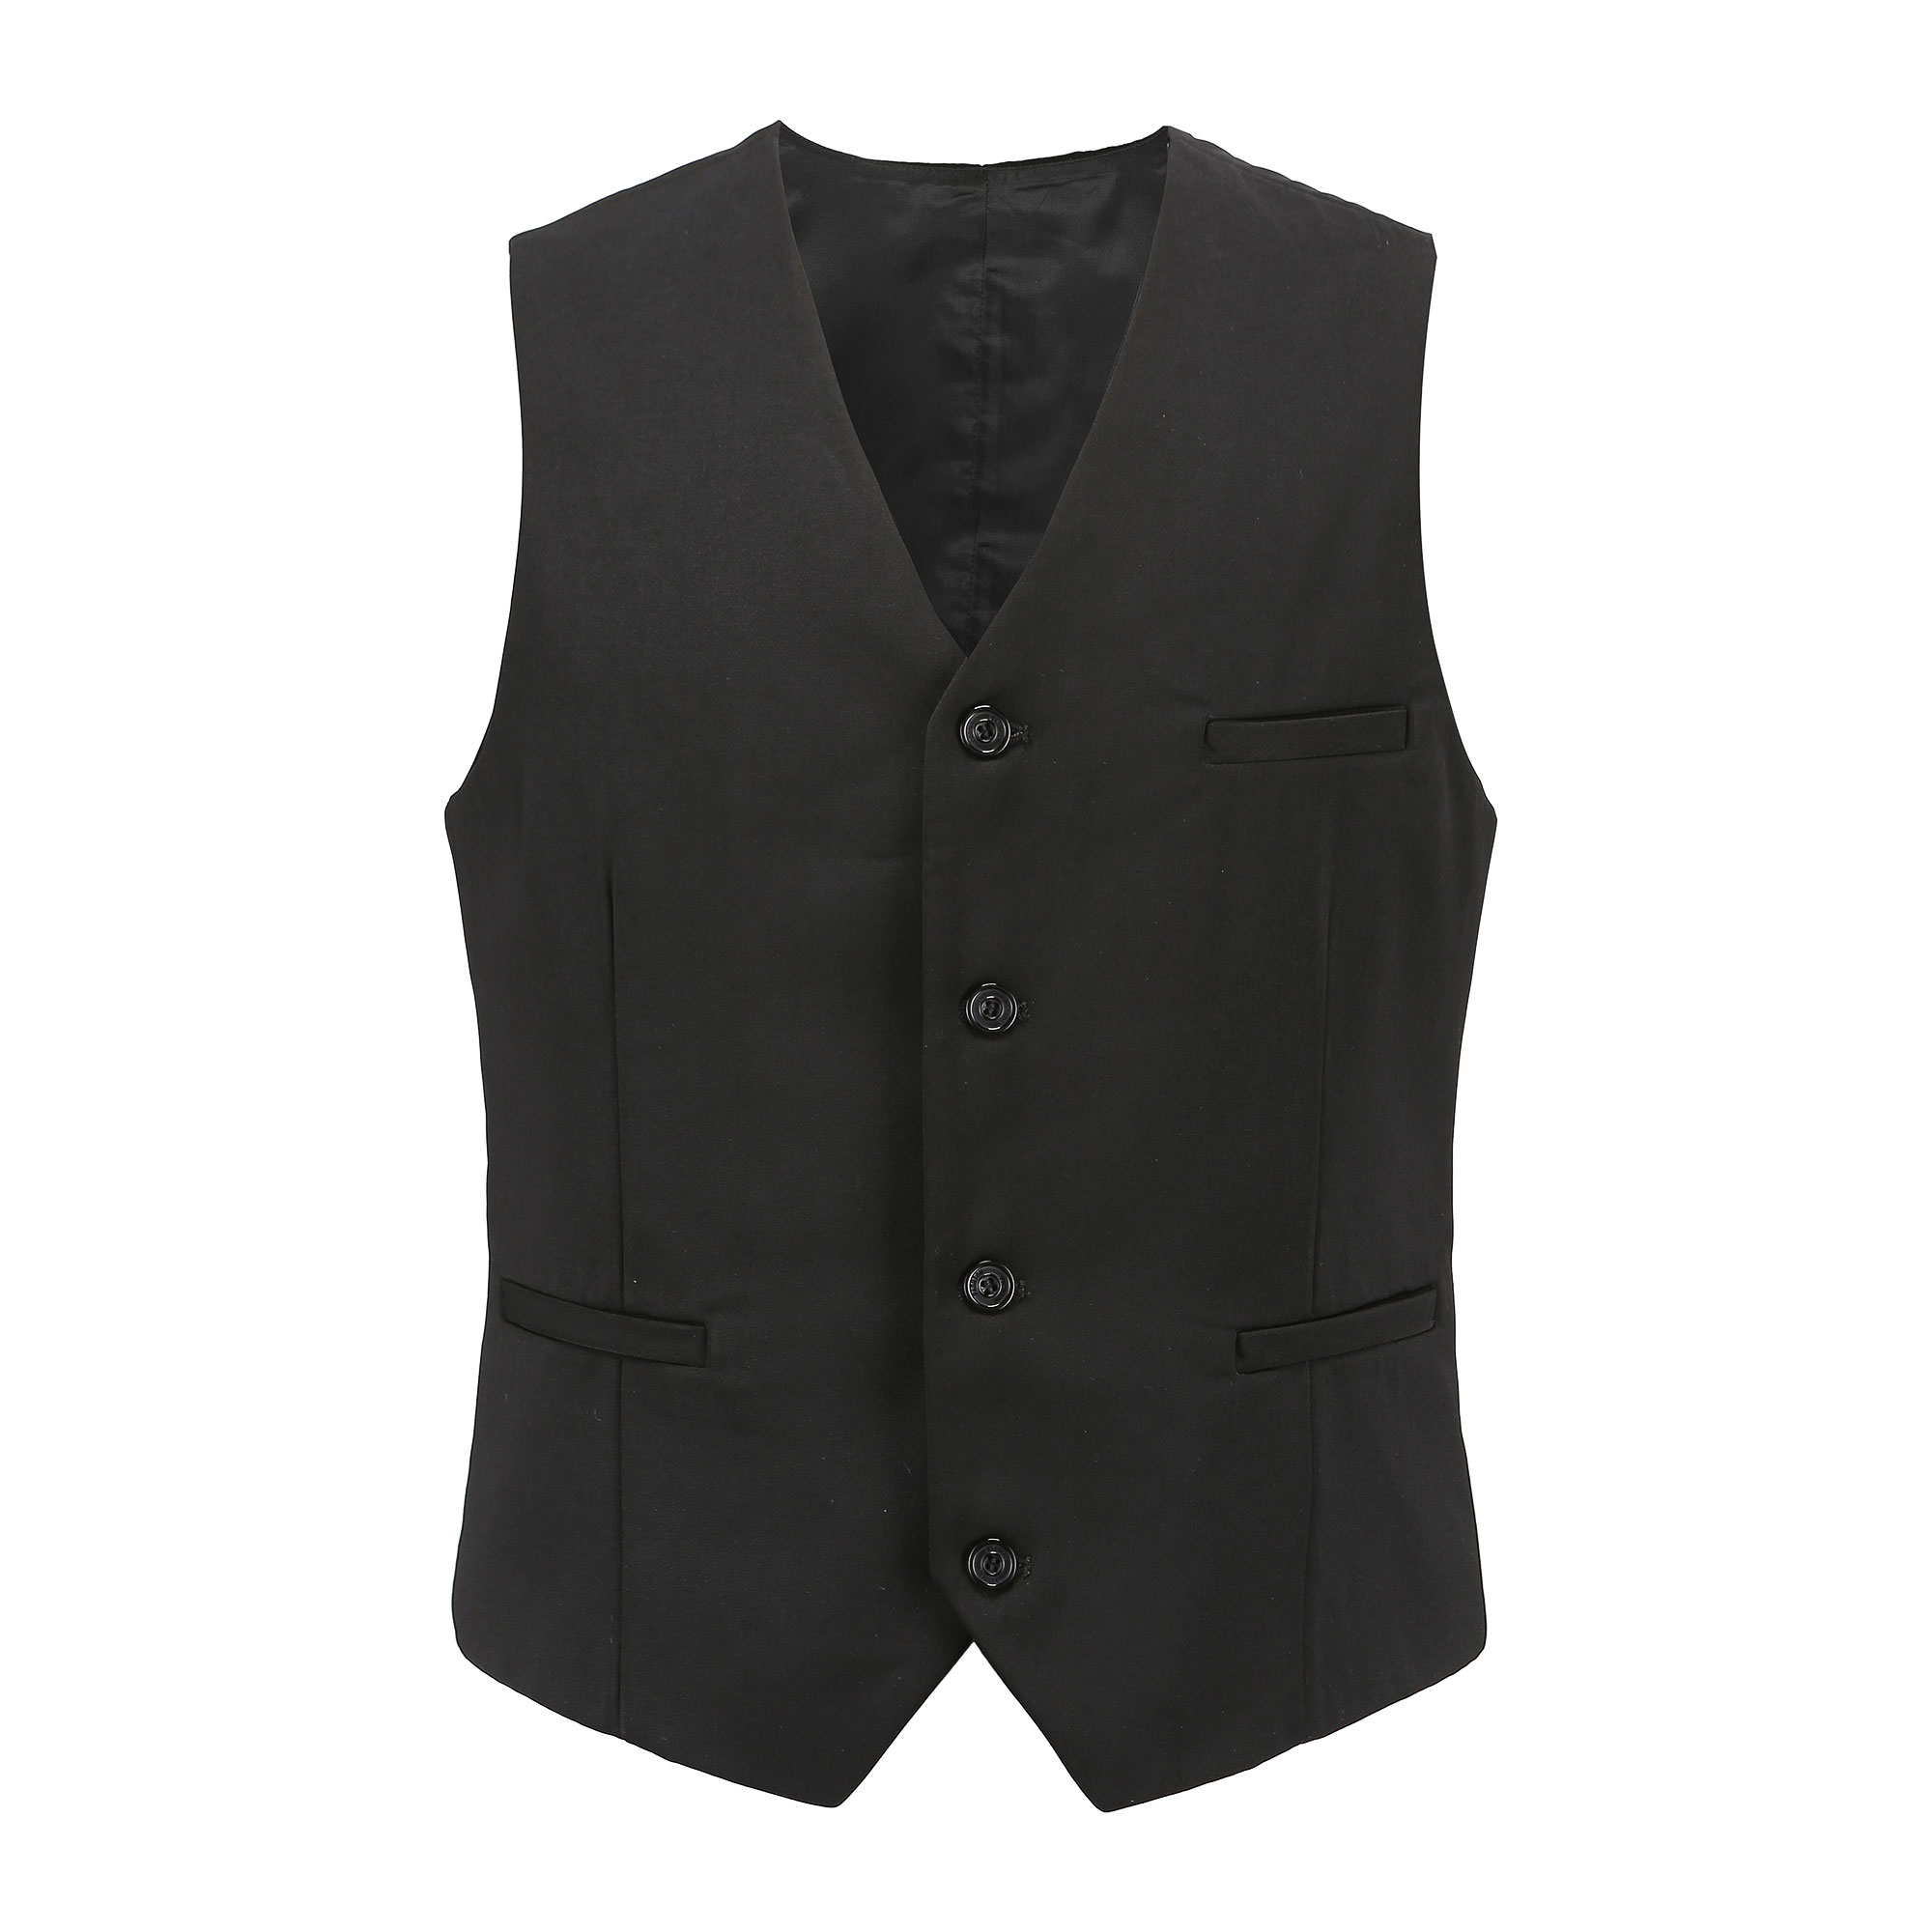 Light Weight Stab Resistant Waistcoat - StabApparel-Stab proof clothing ...